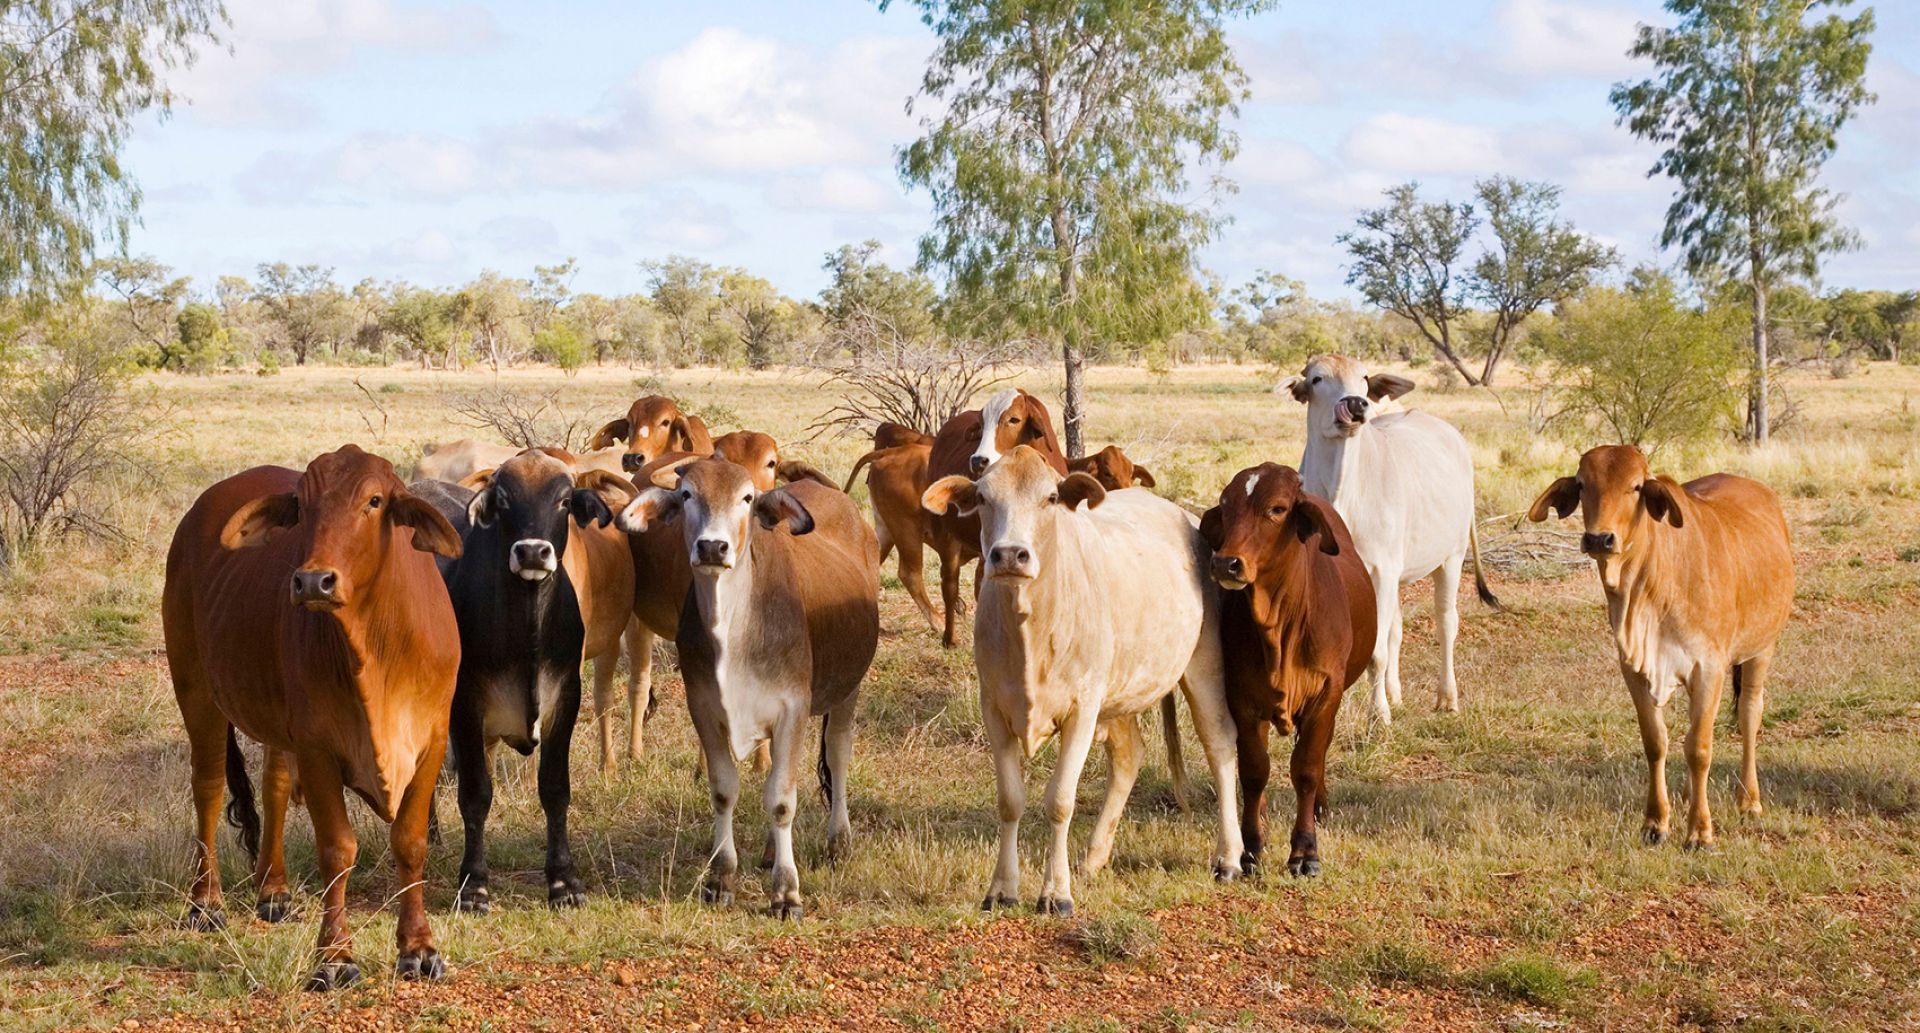 Cattle in the dry tropics